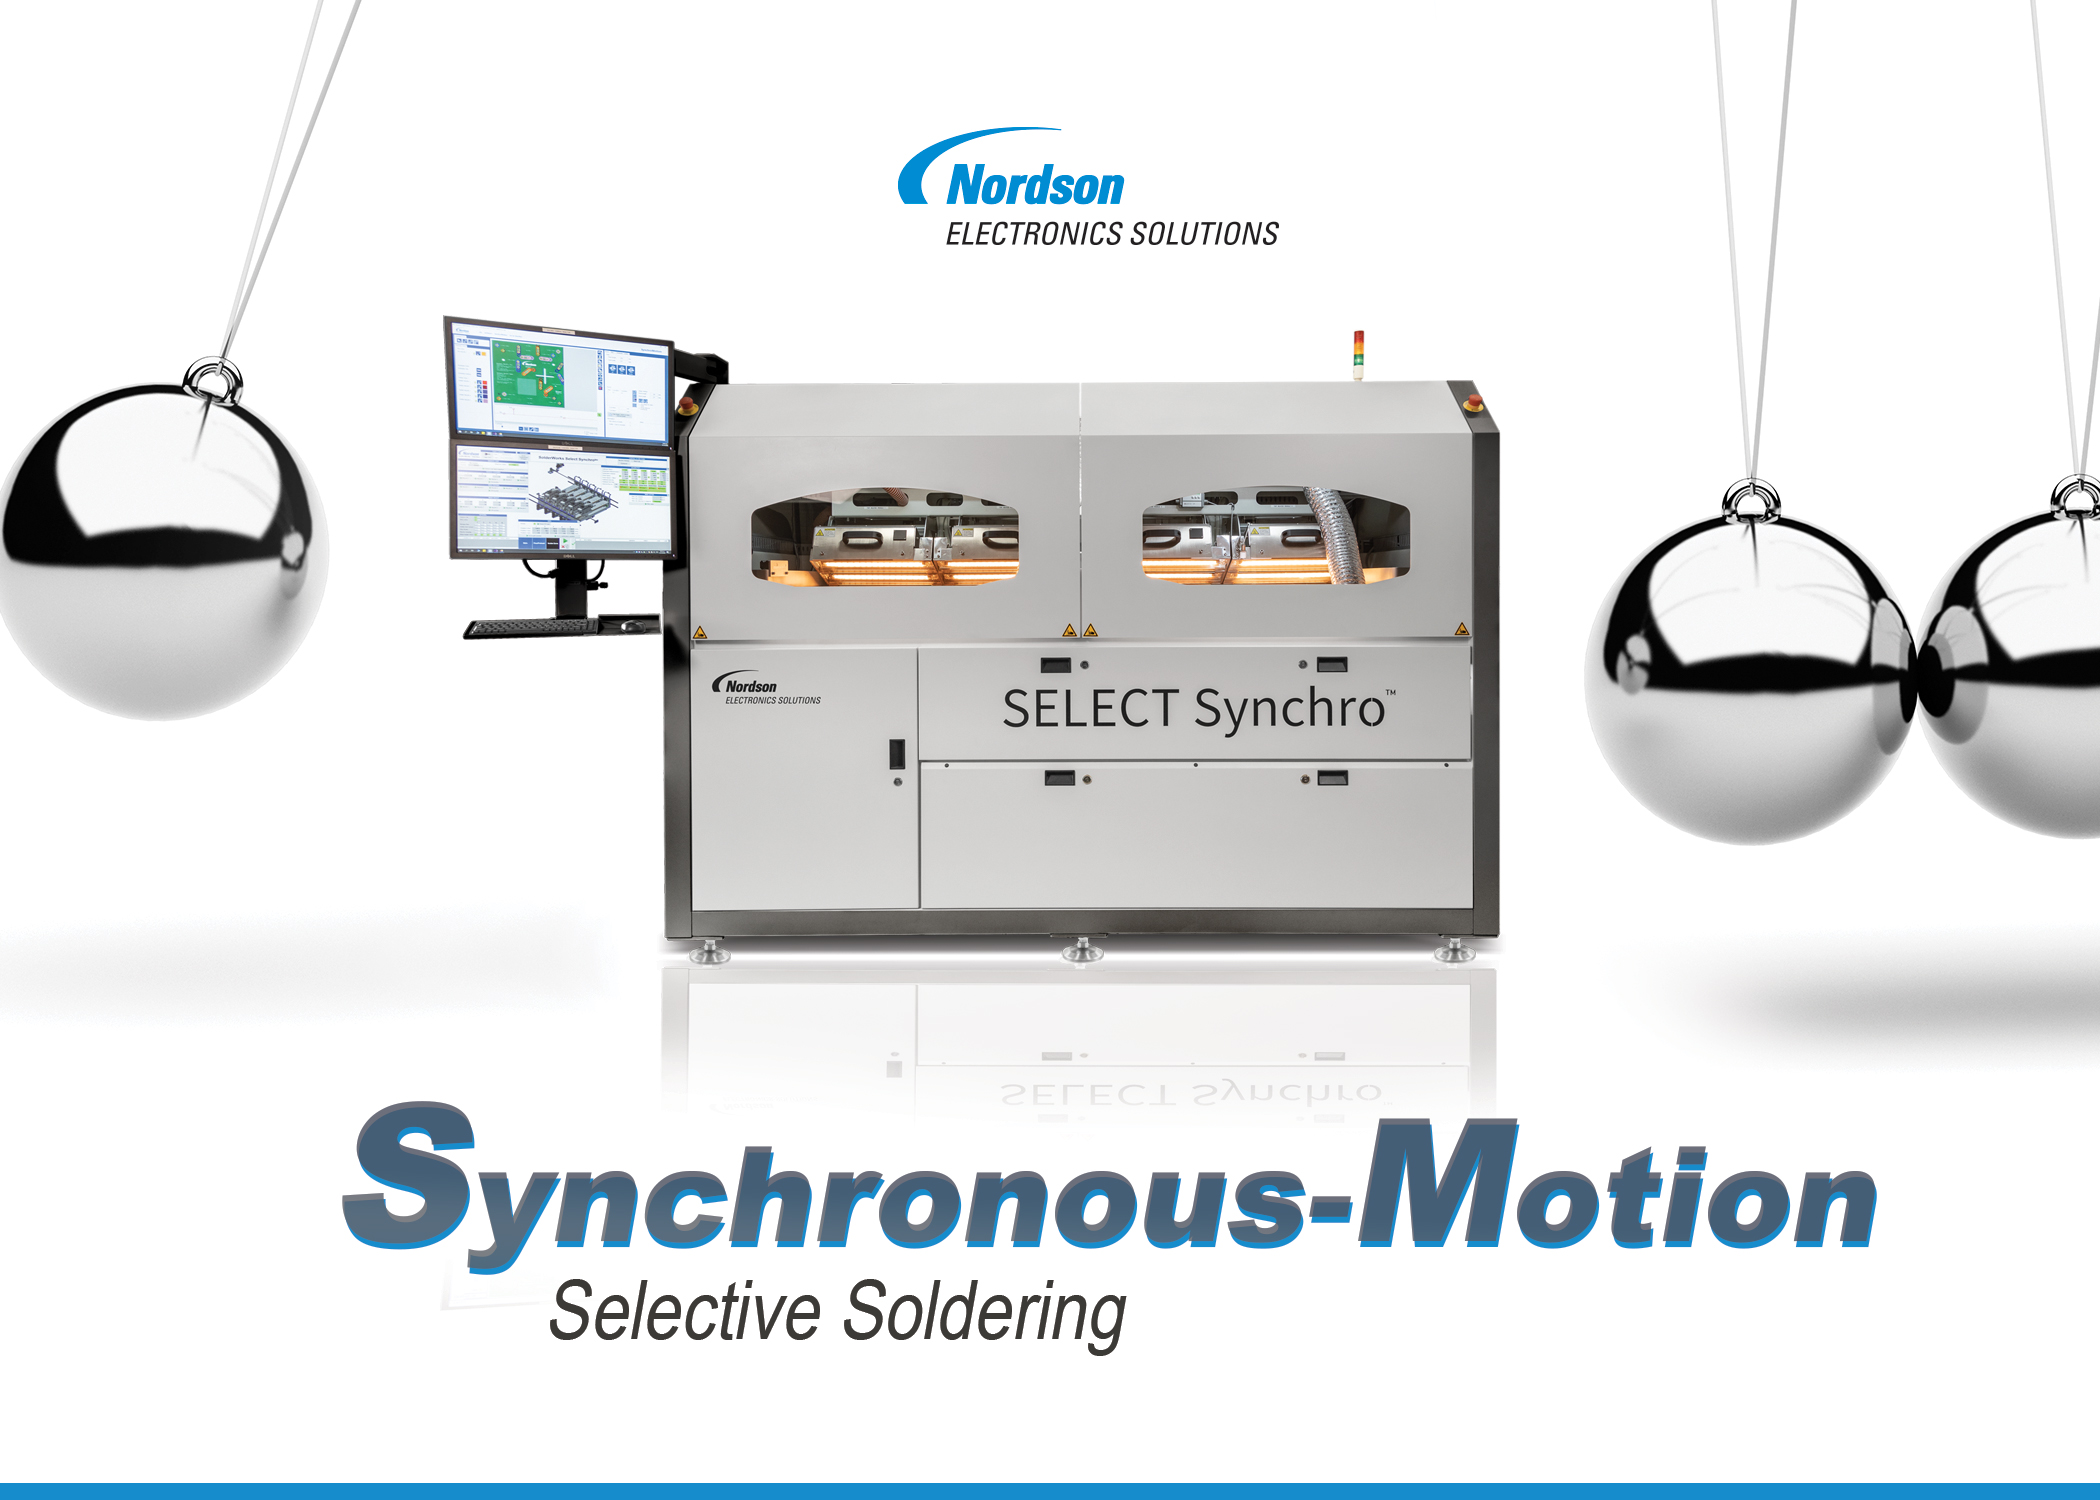 Nordson Electronics Solutions